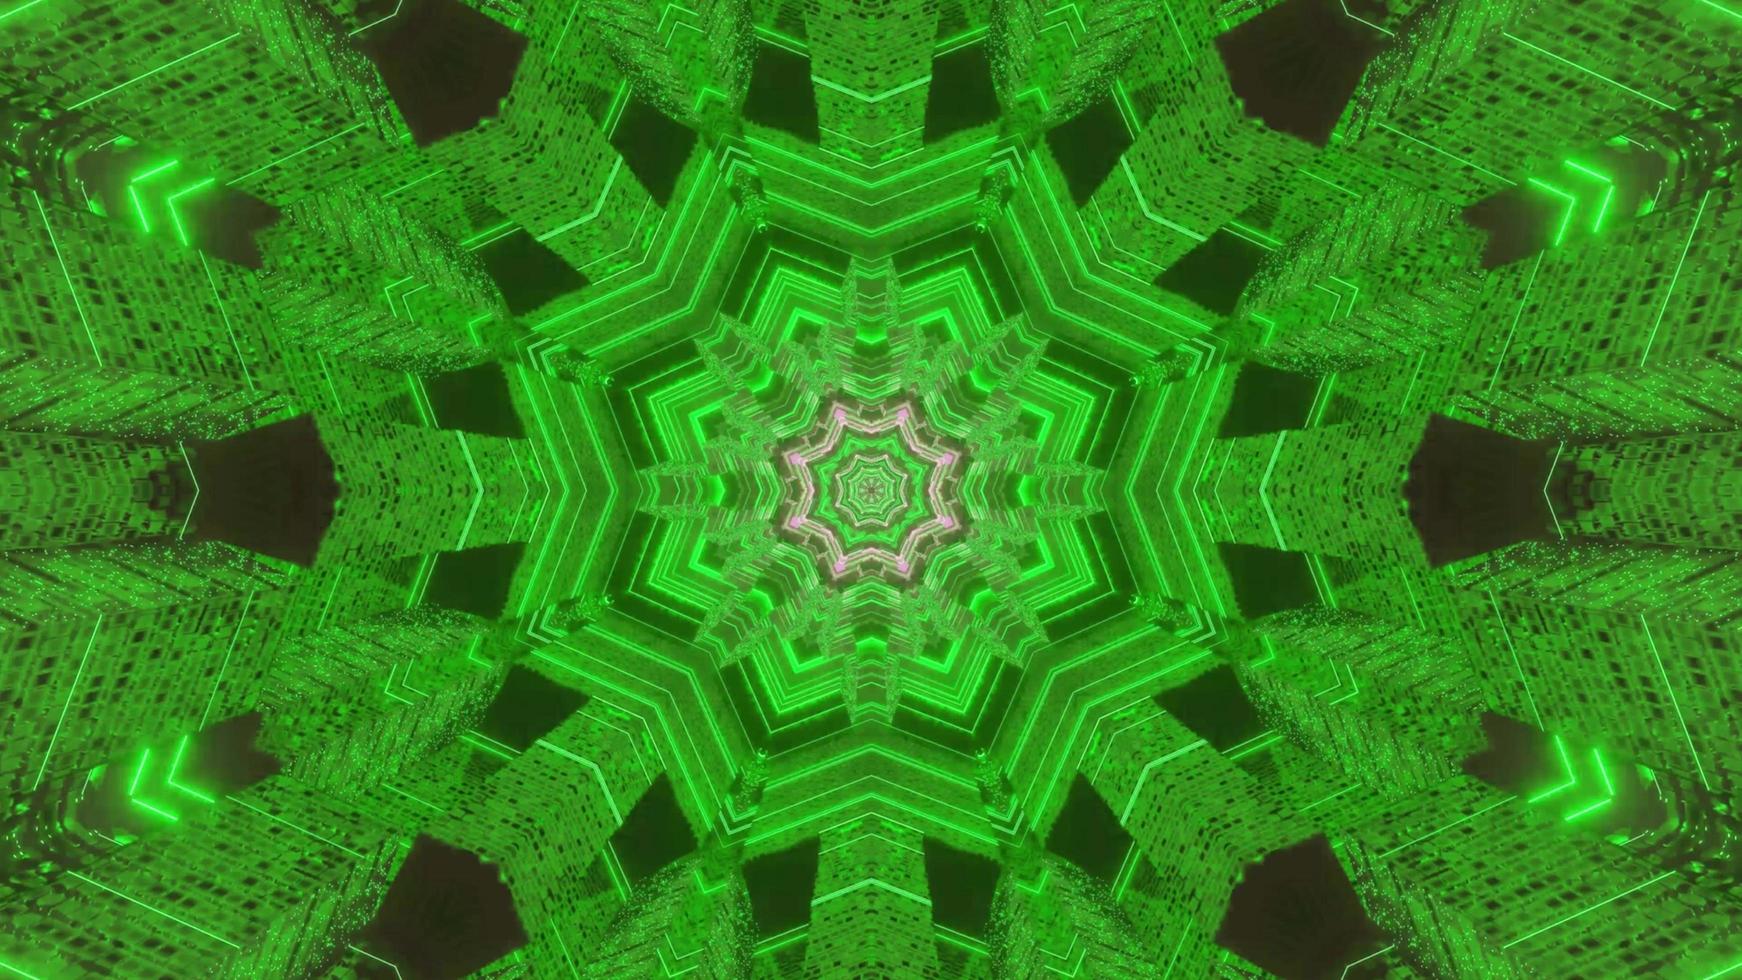 Green and gray floral 3D kaleidoscope design illustration for background or texture photo